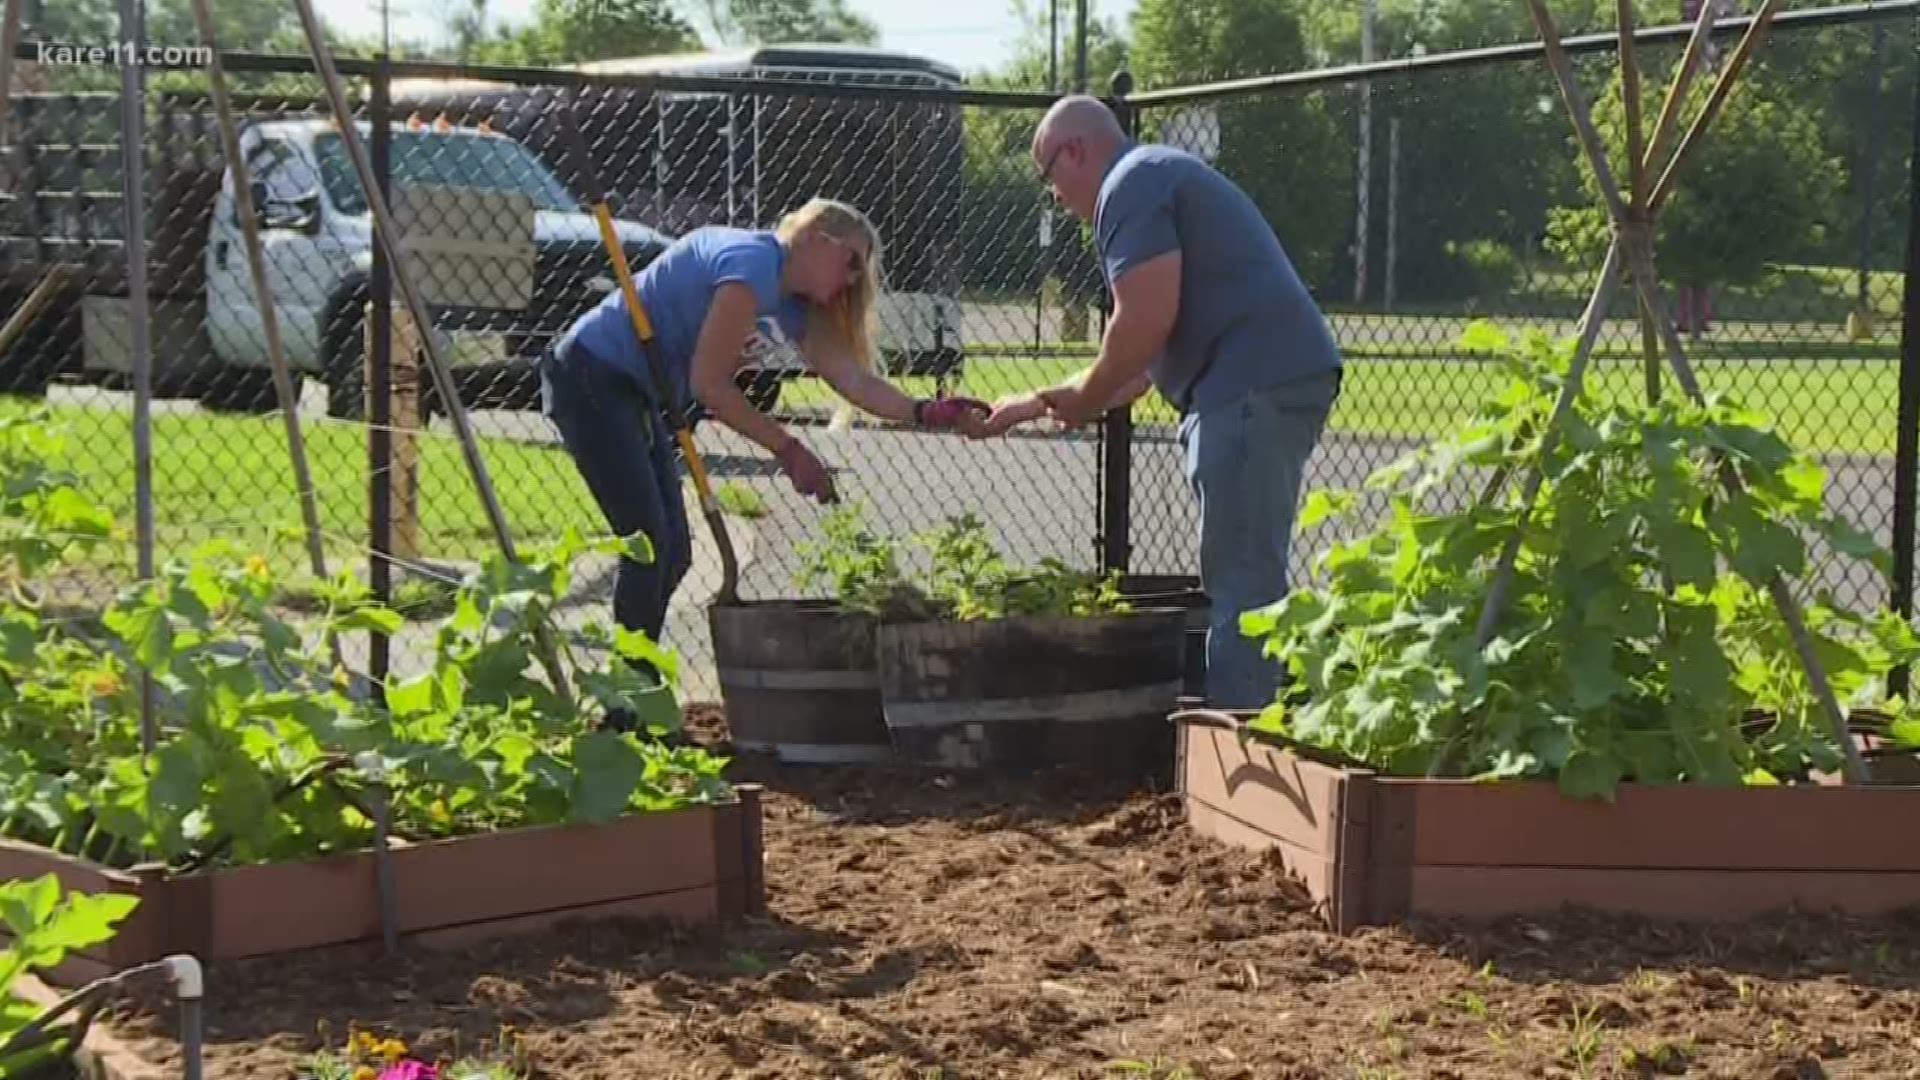 We visit one of the 300 Giving Garden's that the Cargill employees manage for local food shelves.